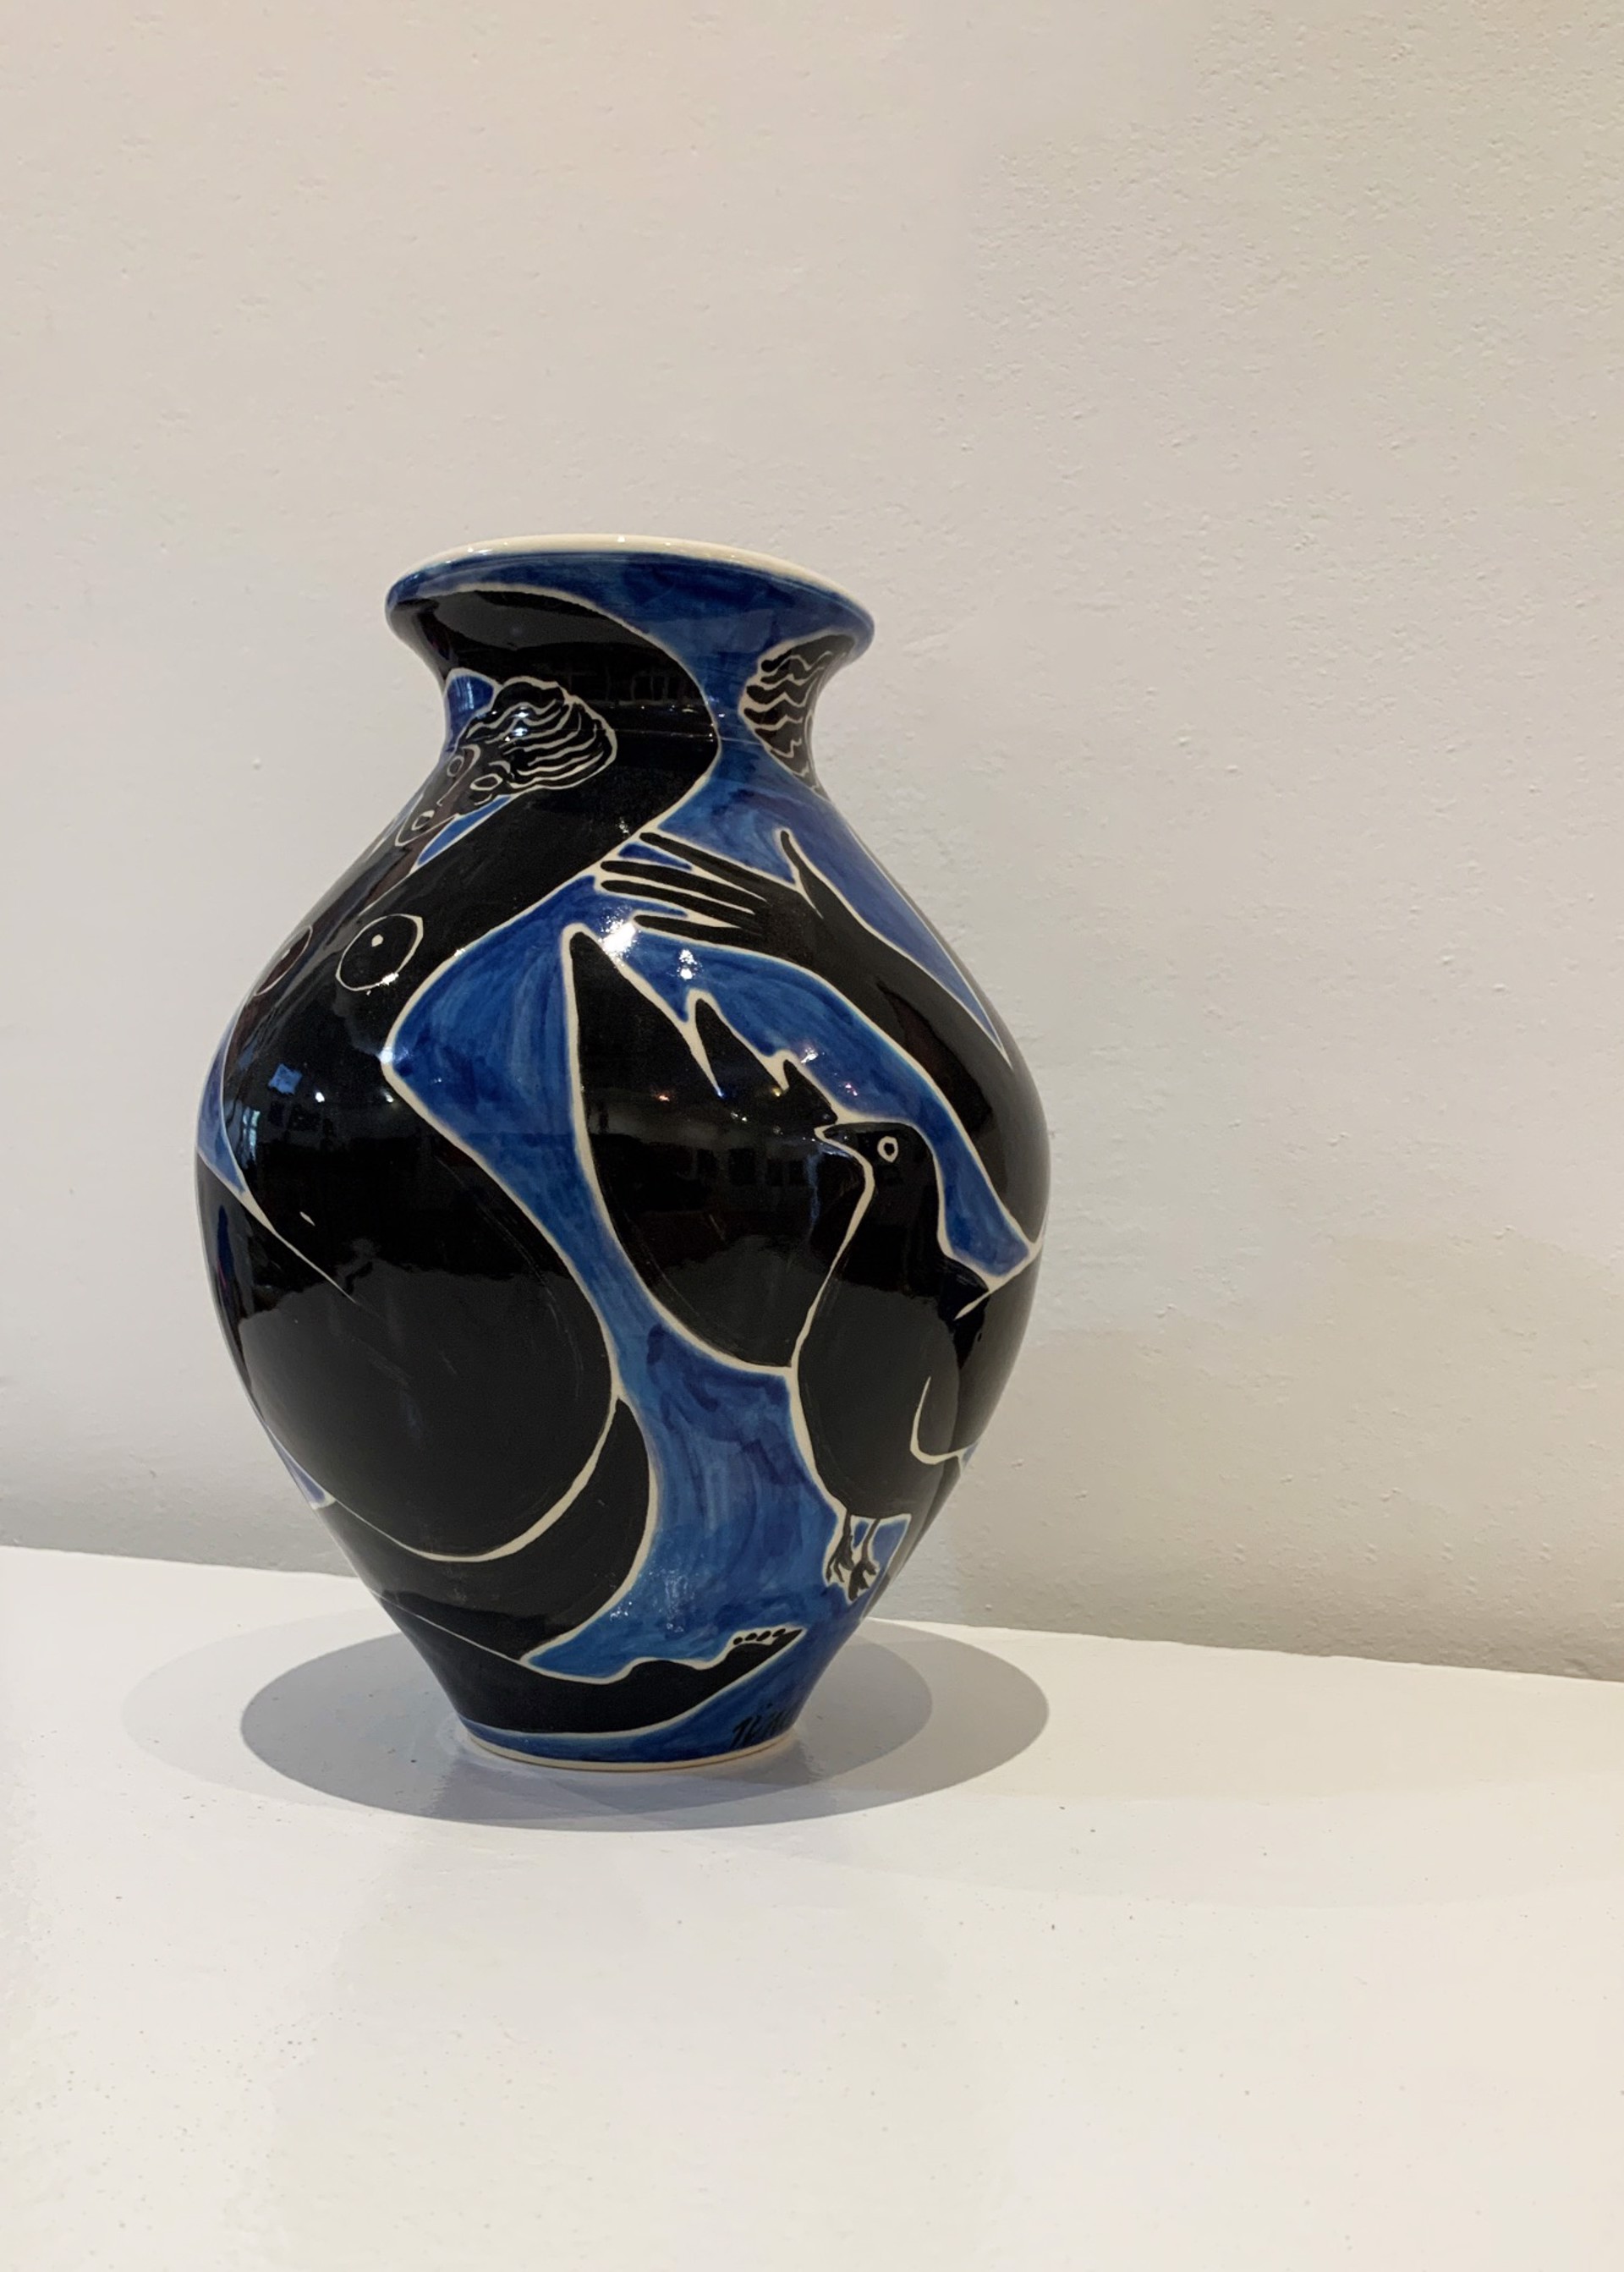 Vase #30 by Ken and Tina Riesterer